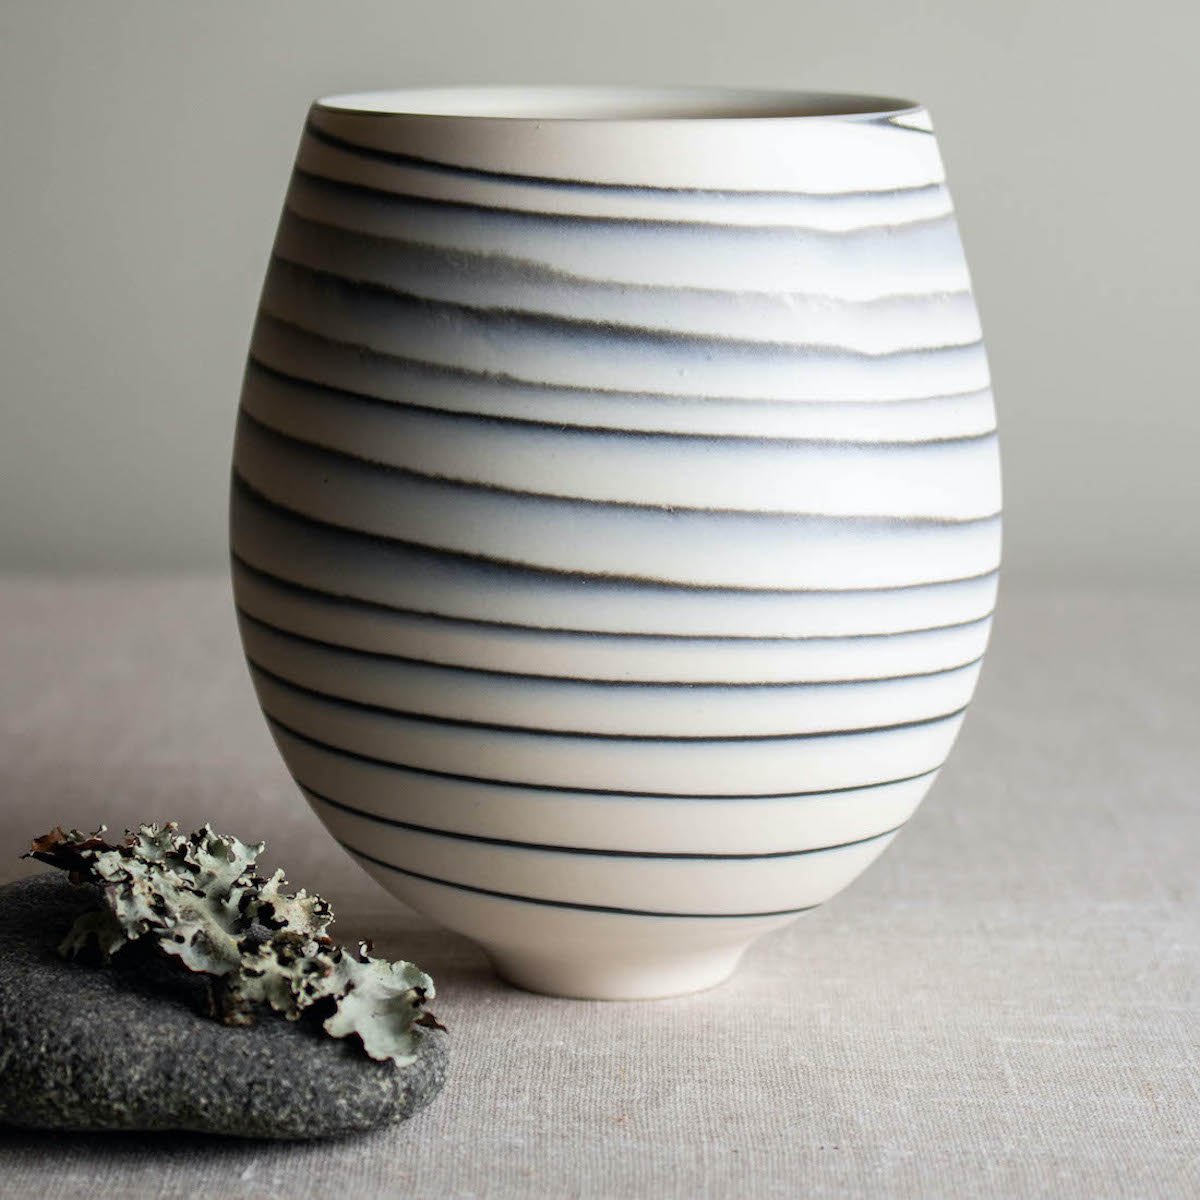 Black and White Vessel by Lisa Fleming